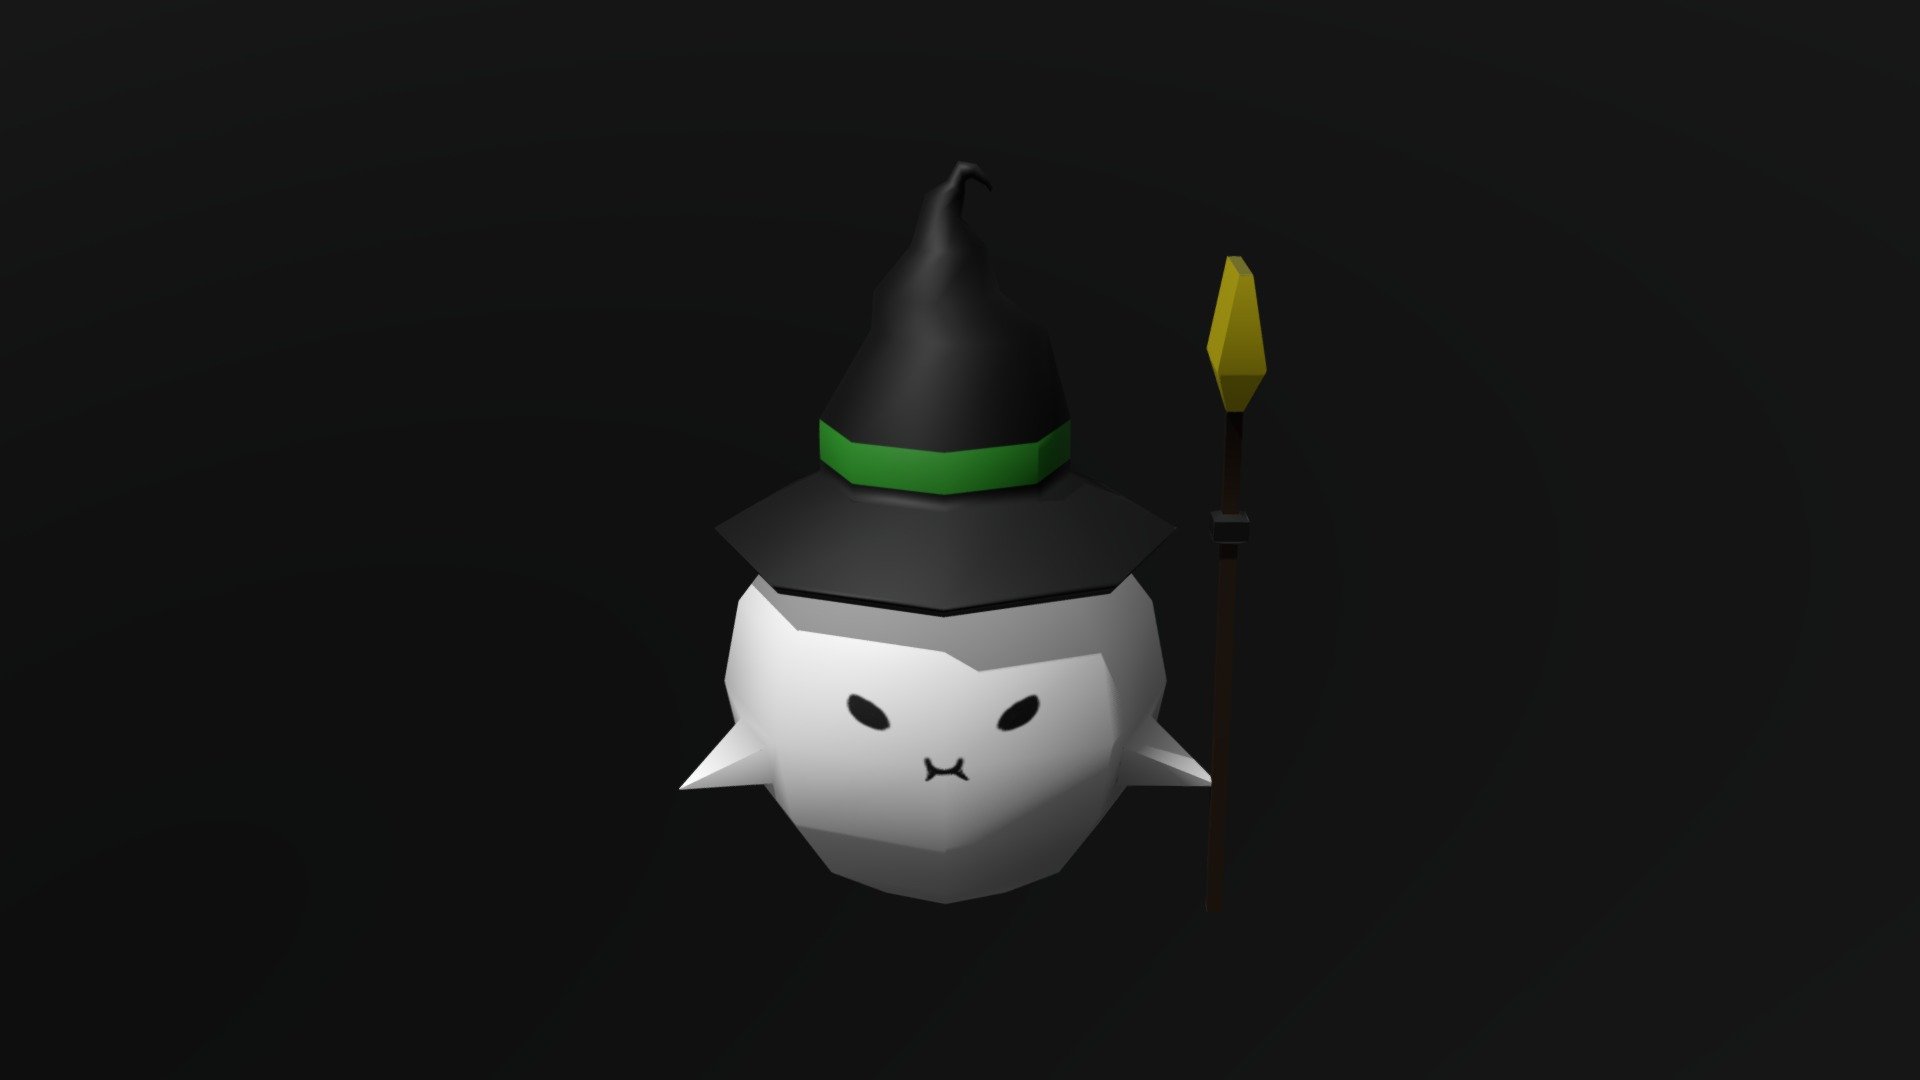 My first Low poly model &amp; first ghost model in general :) - Cute Low-poly Ghost || RyanSmithNG - 3D model by Ryan Joshua Smith (@ryanjoshua.smith) 3d model